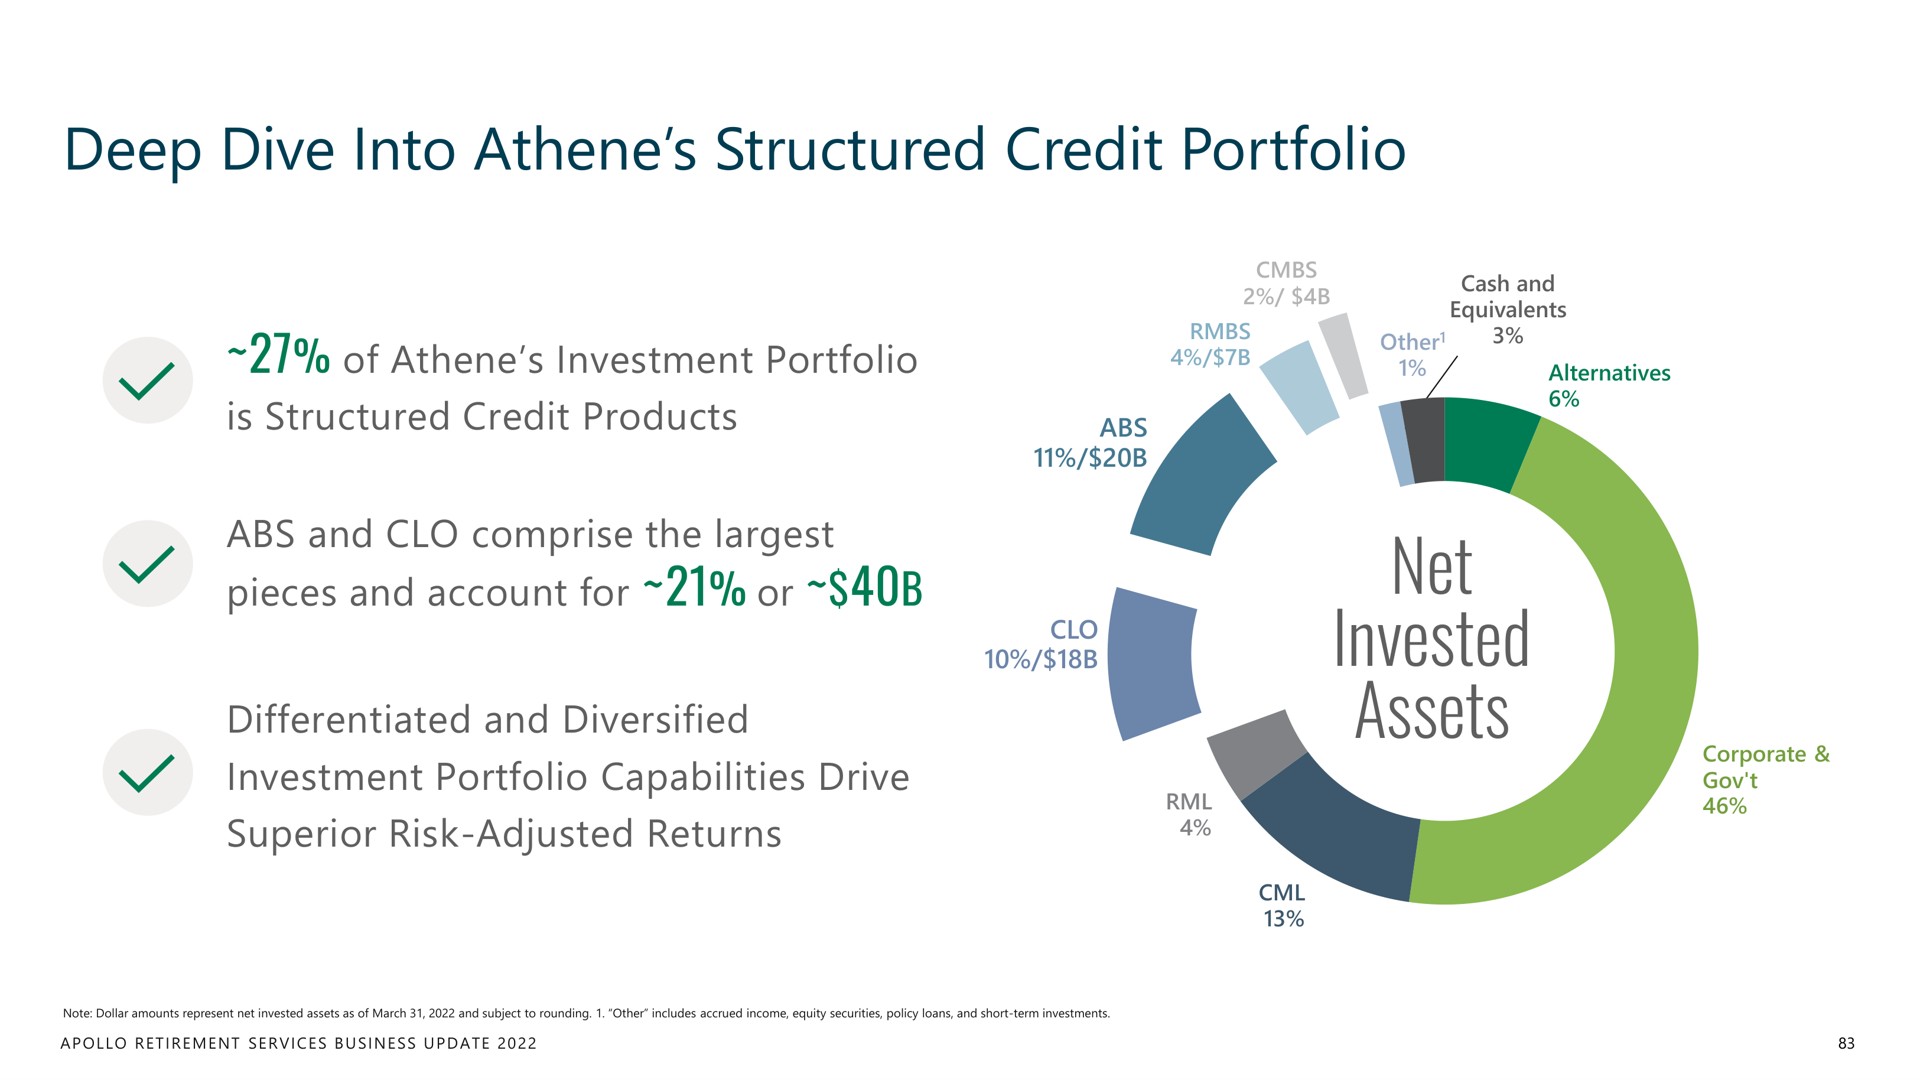 deep dive into structured credit portfolio net invested assets | Apollo Global Management